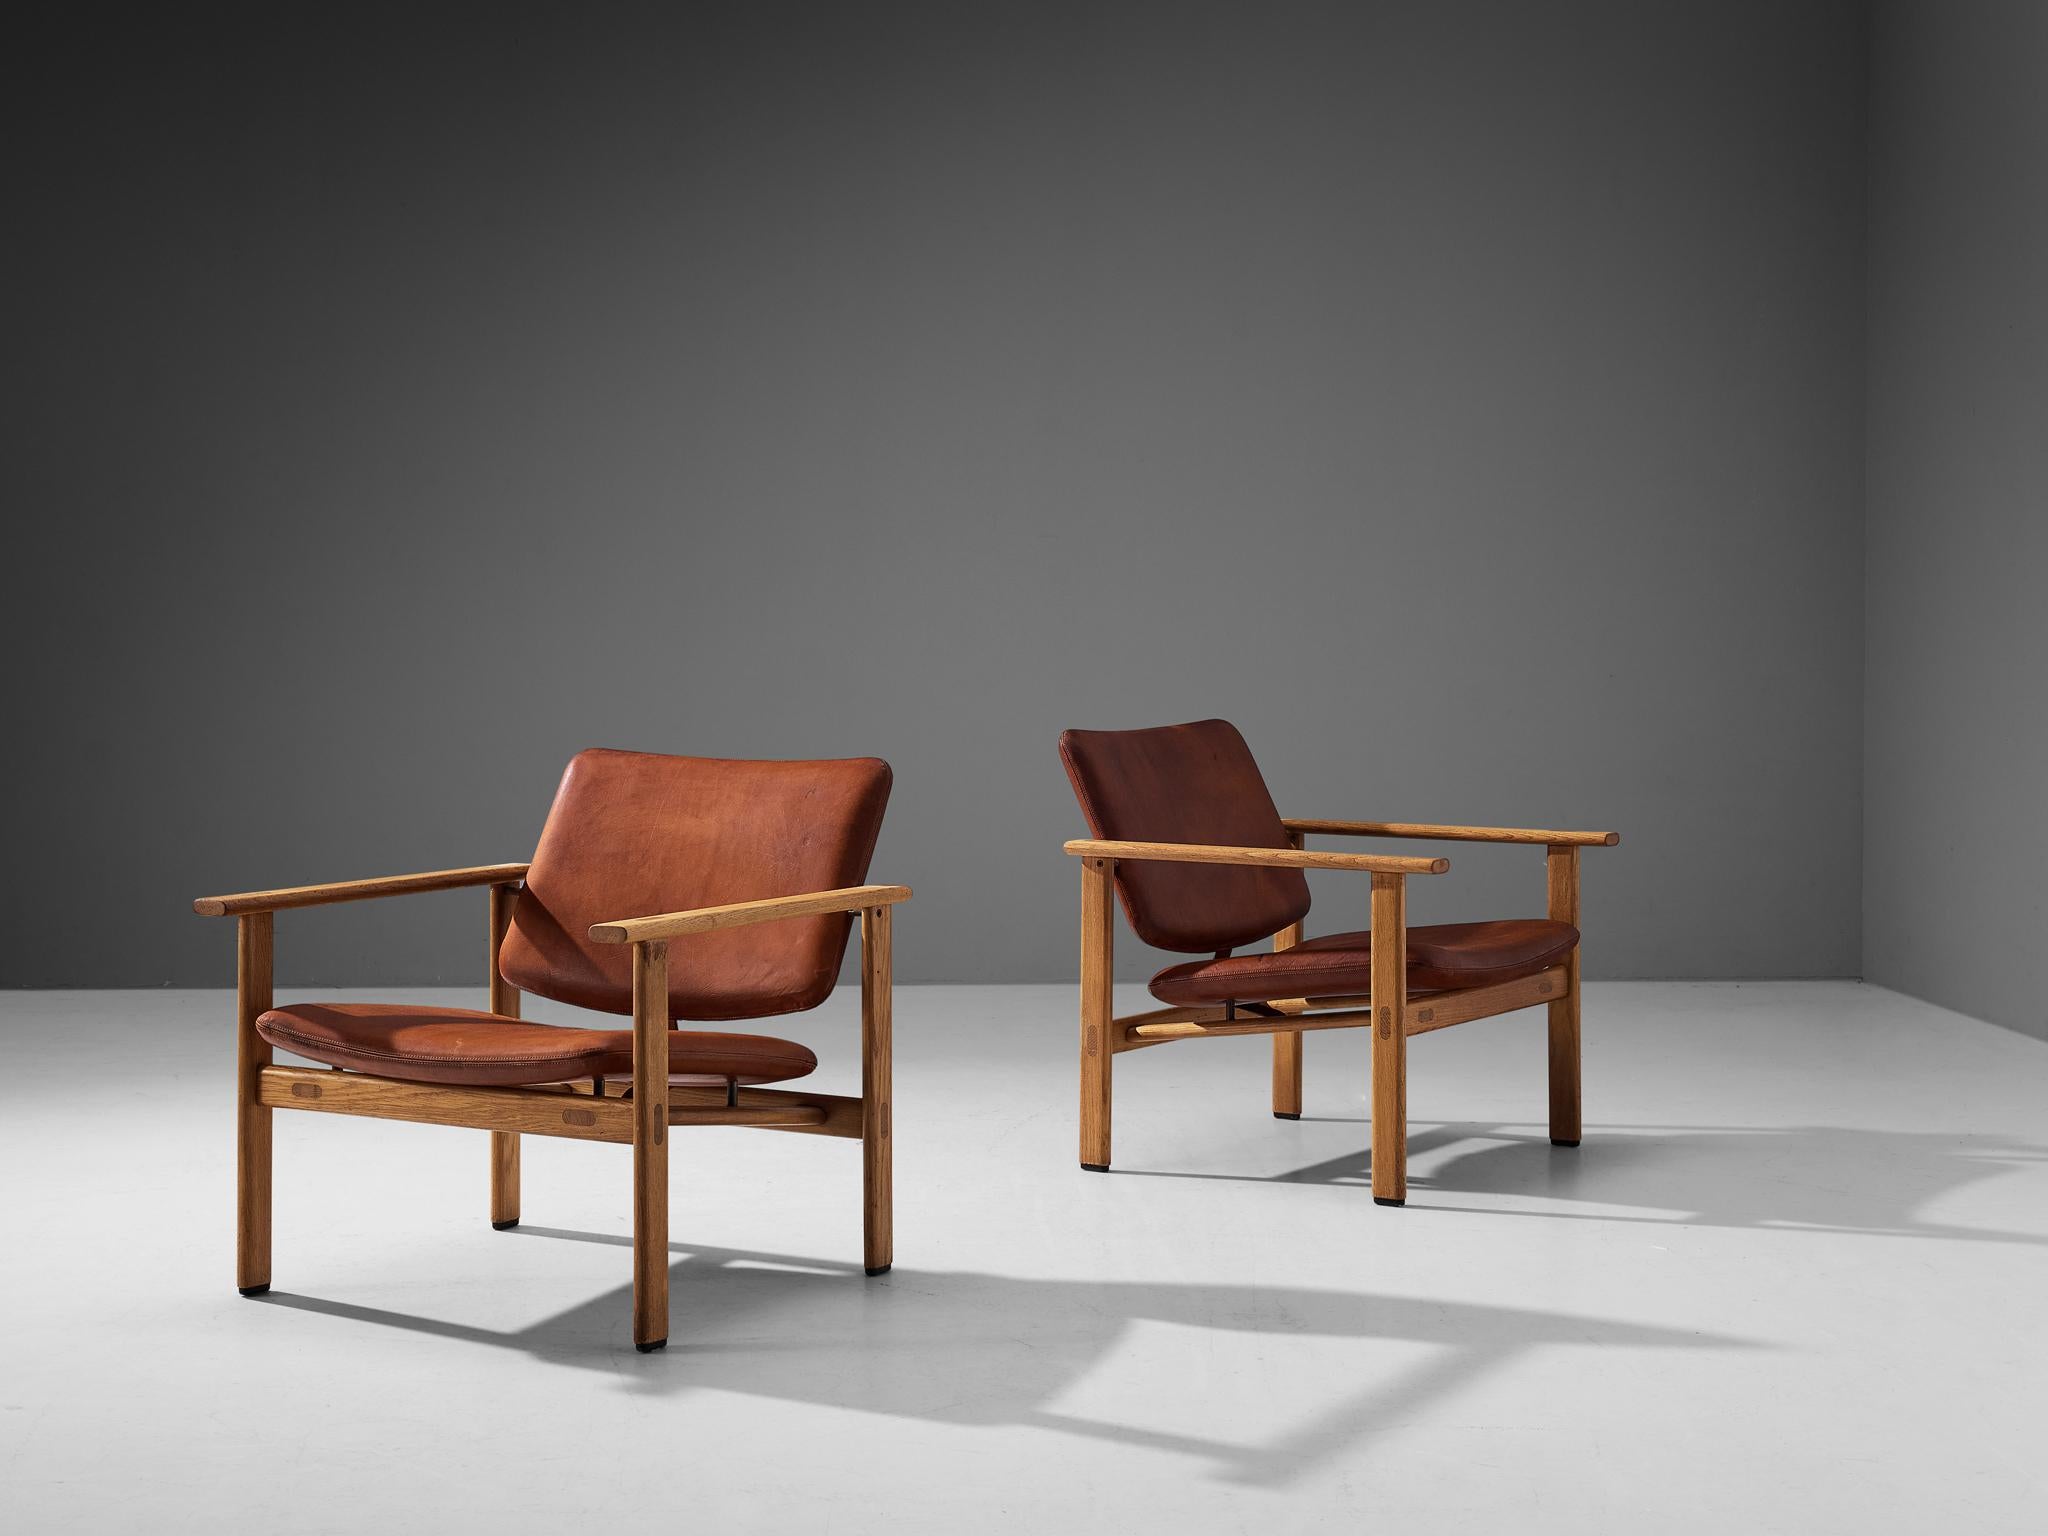 Arne Jacobsen for Fritz Hansen, armchairs, model '4700', oak, leather, Denmark, 1965.

Pair of modest armchairs designed by the Danish designer Arne Jacobsen (1902-1971). The frame shows elegant geometric lines and is executed in solid oak. A nice